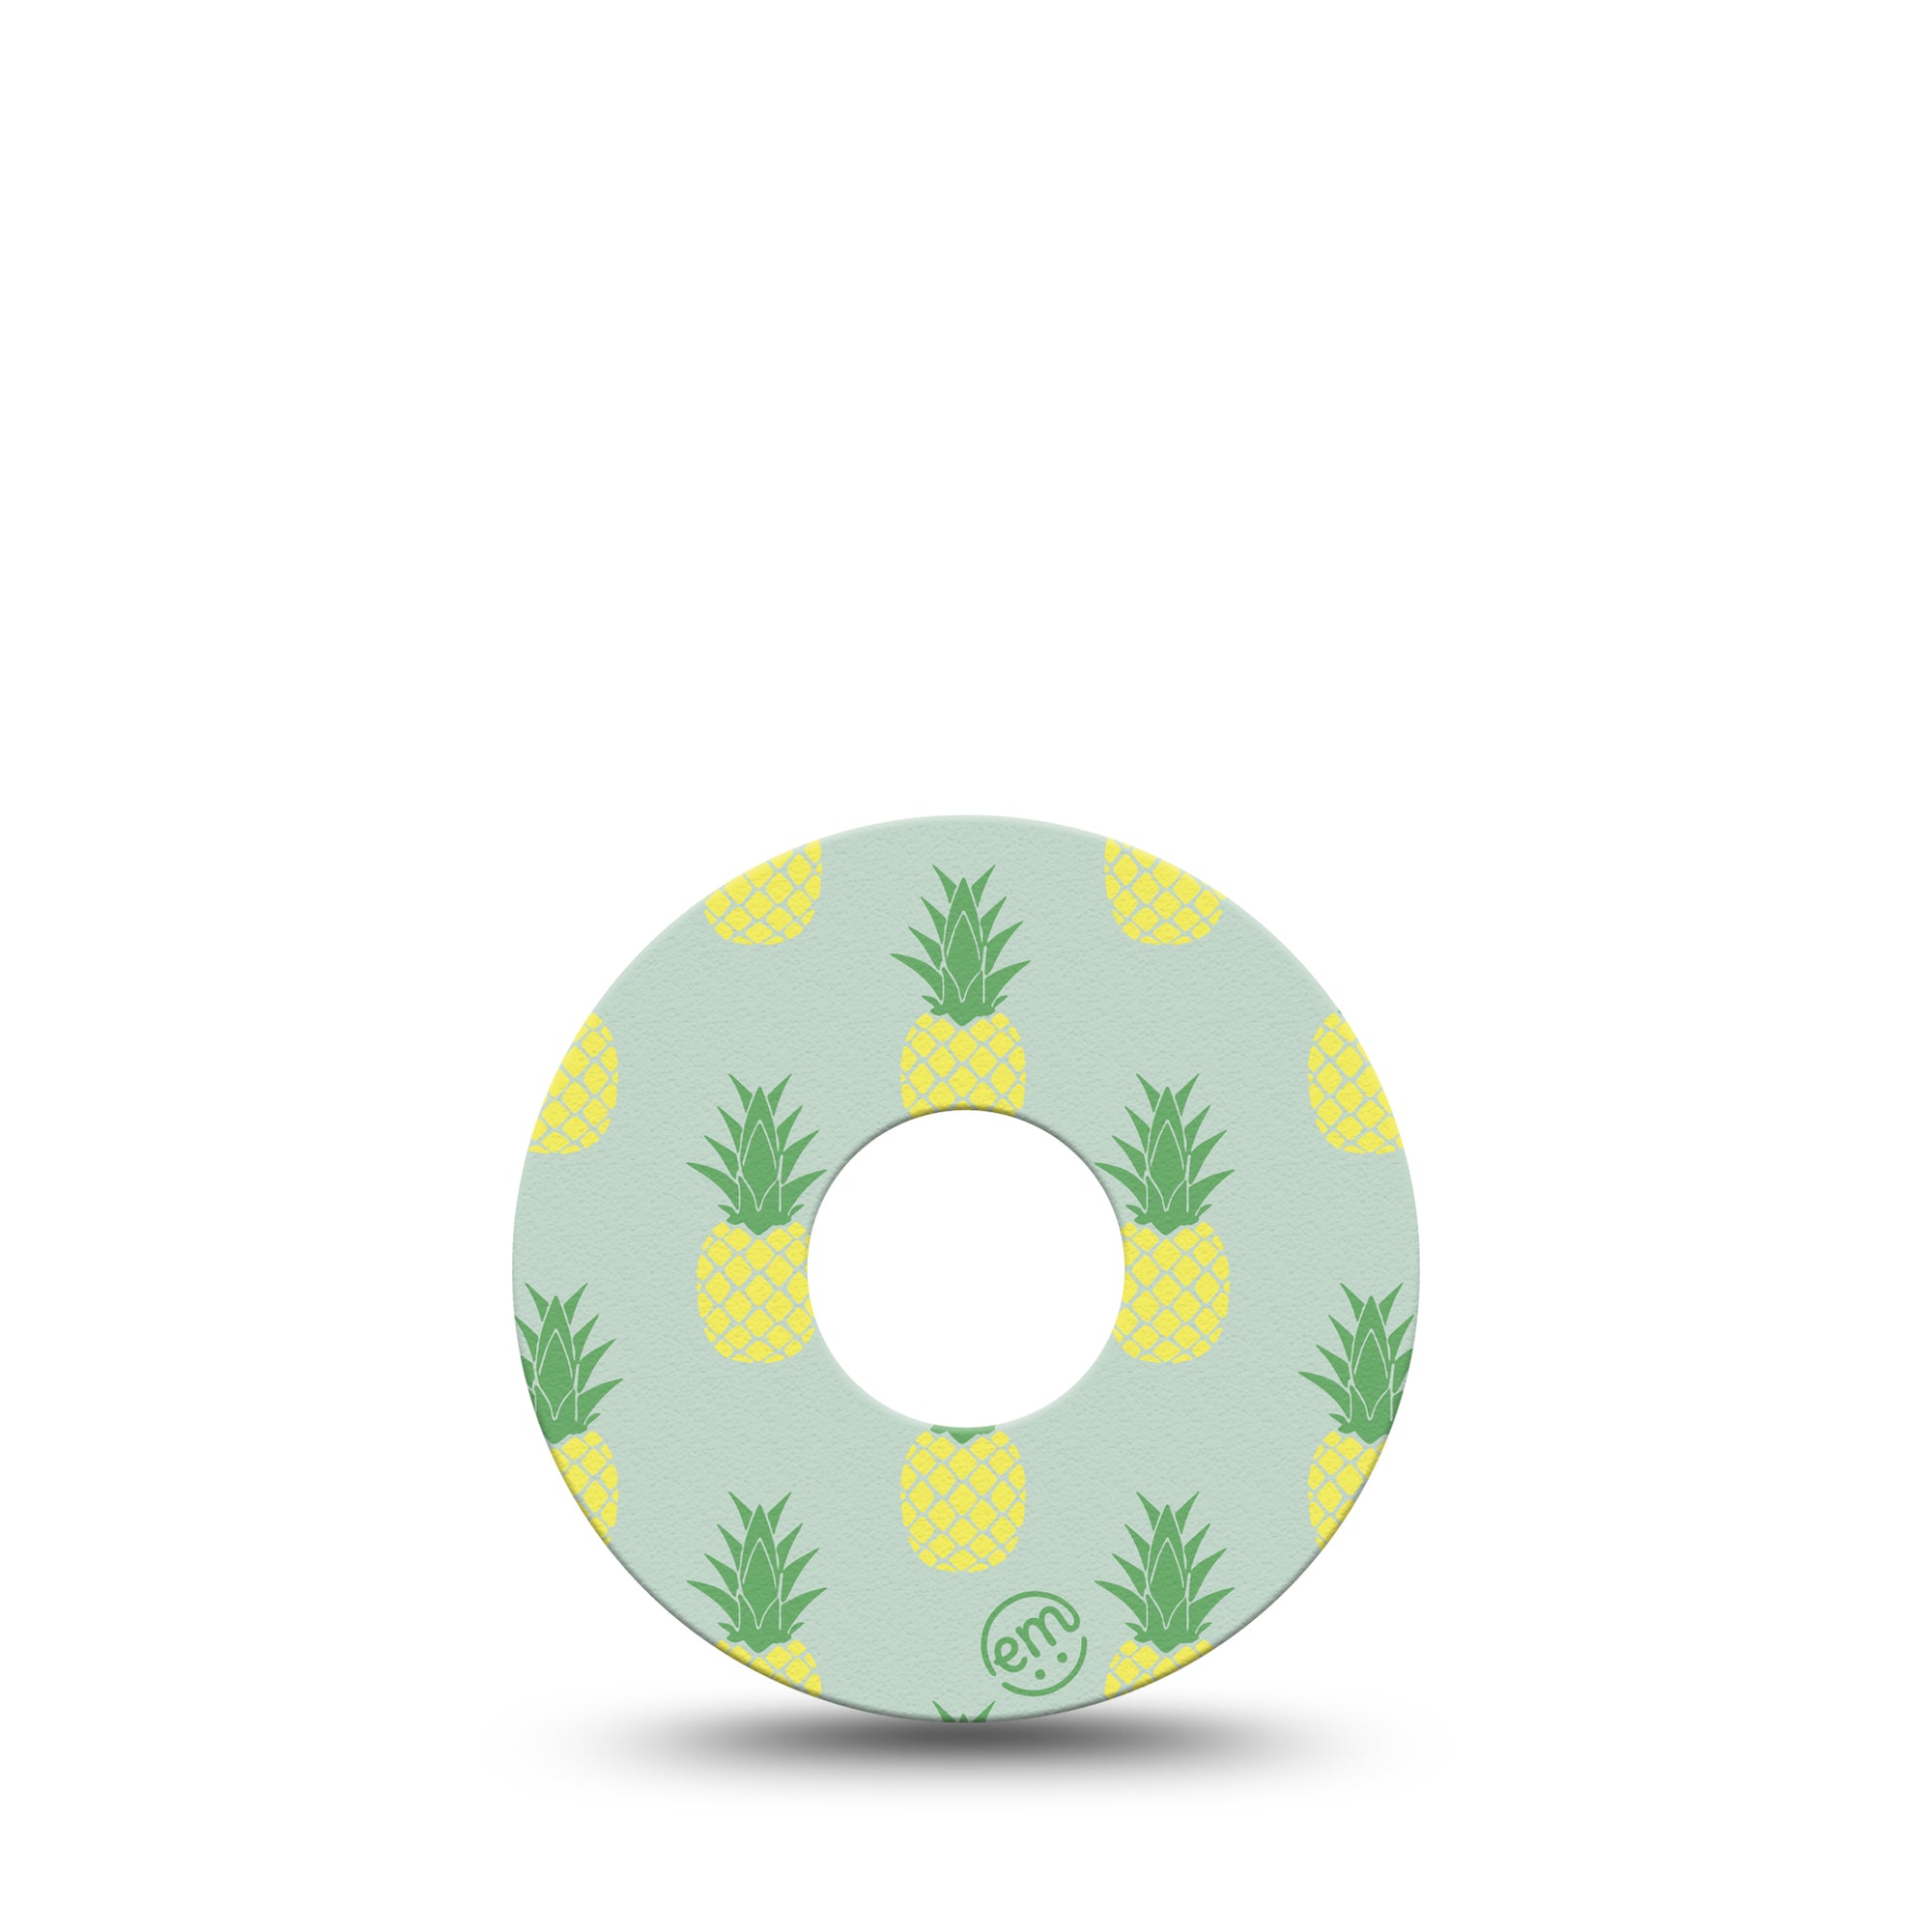 ExpressionMed Vintage Pineapple Libre 3 Tape, Single, Pineapple Bunch Themed, CGM Patch Design